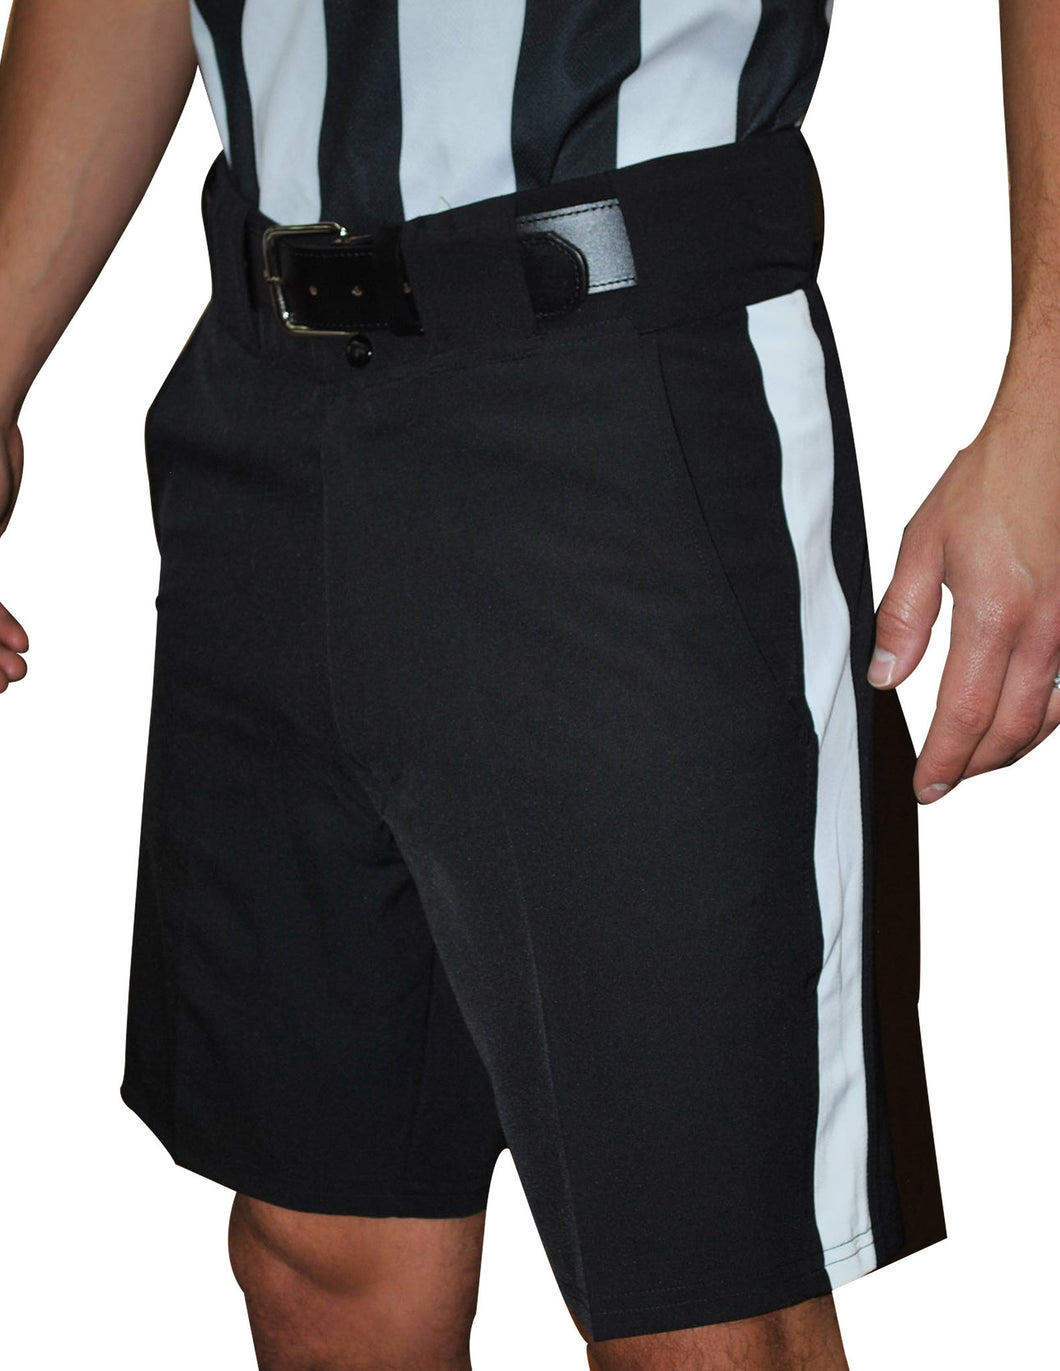 FBS181 - Smitty Premium Knit Polyester Football Shorts with Non-Slip Silicone Gripper Waistband - 1 1/4